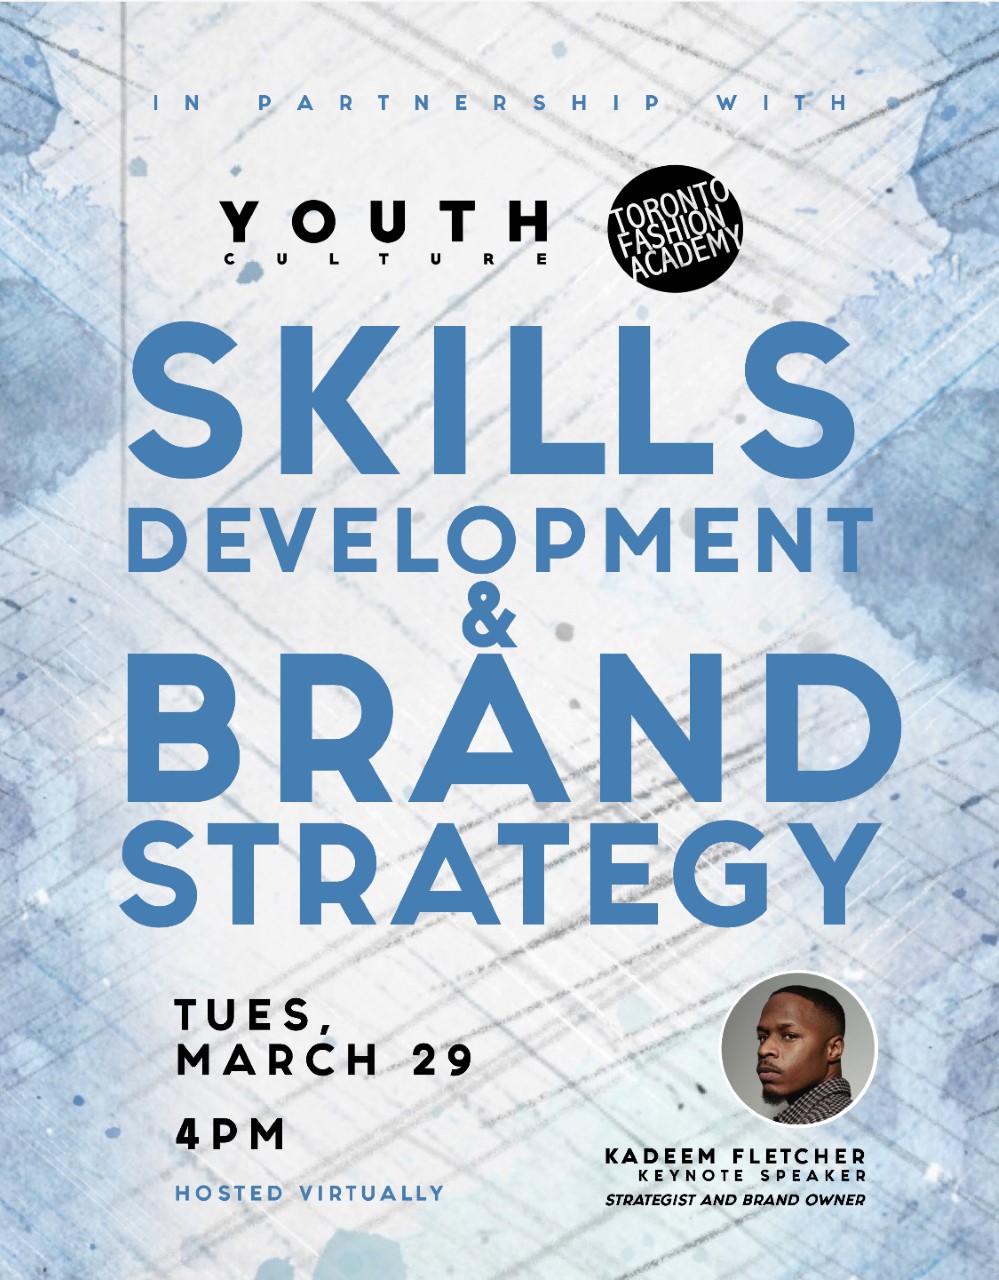 Event poster in light blue and white that says from top to bottom, "In Partnership With Youth Culture and Toronto Fashion Academy, Skills Development and Brand Strategy, Tuesday, March 29 4PM. Hosted Virtually. It also has Kadeem Fletcher's photo at the bottom right of the frame with text underneath that says, "Kadeem Fletcher. Keynote Speaker. Strategist and Brand Owner